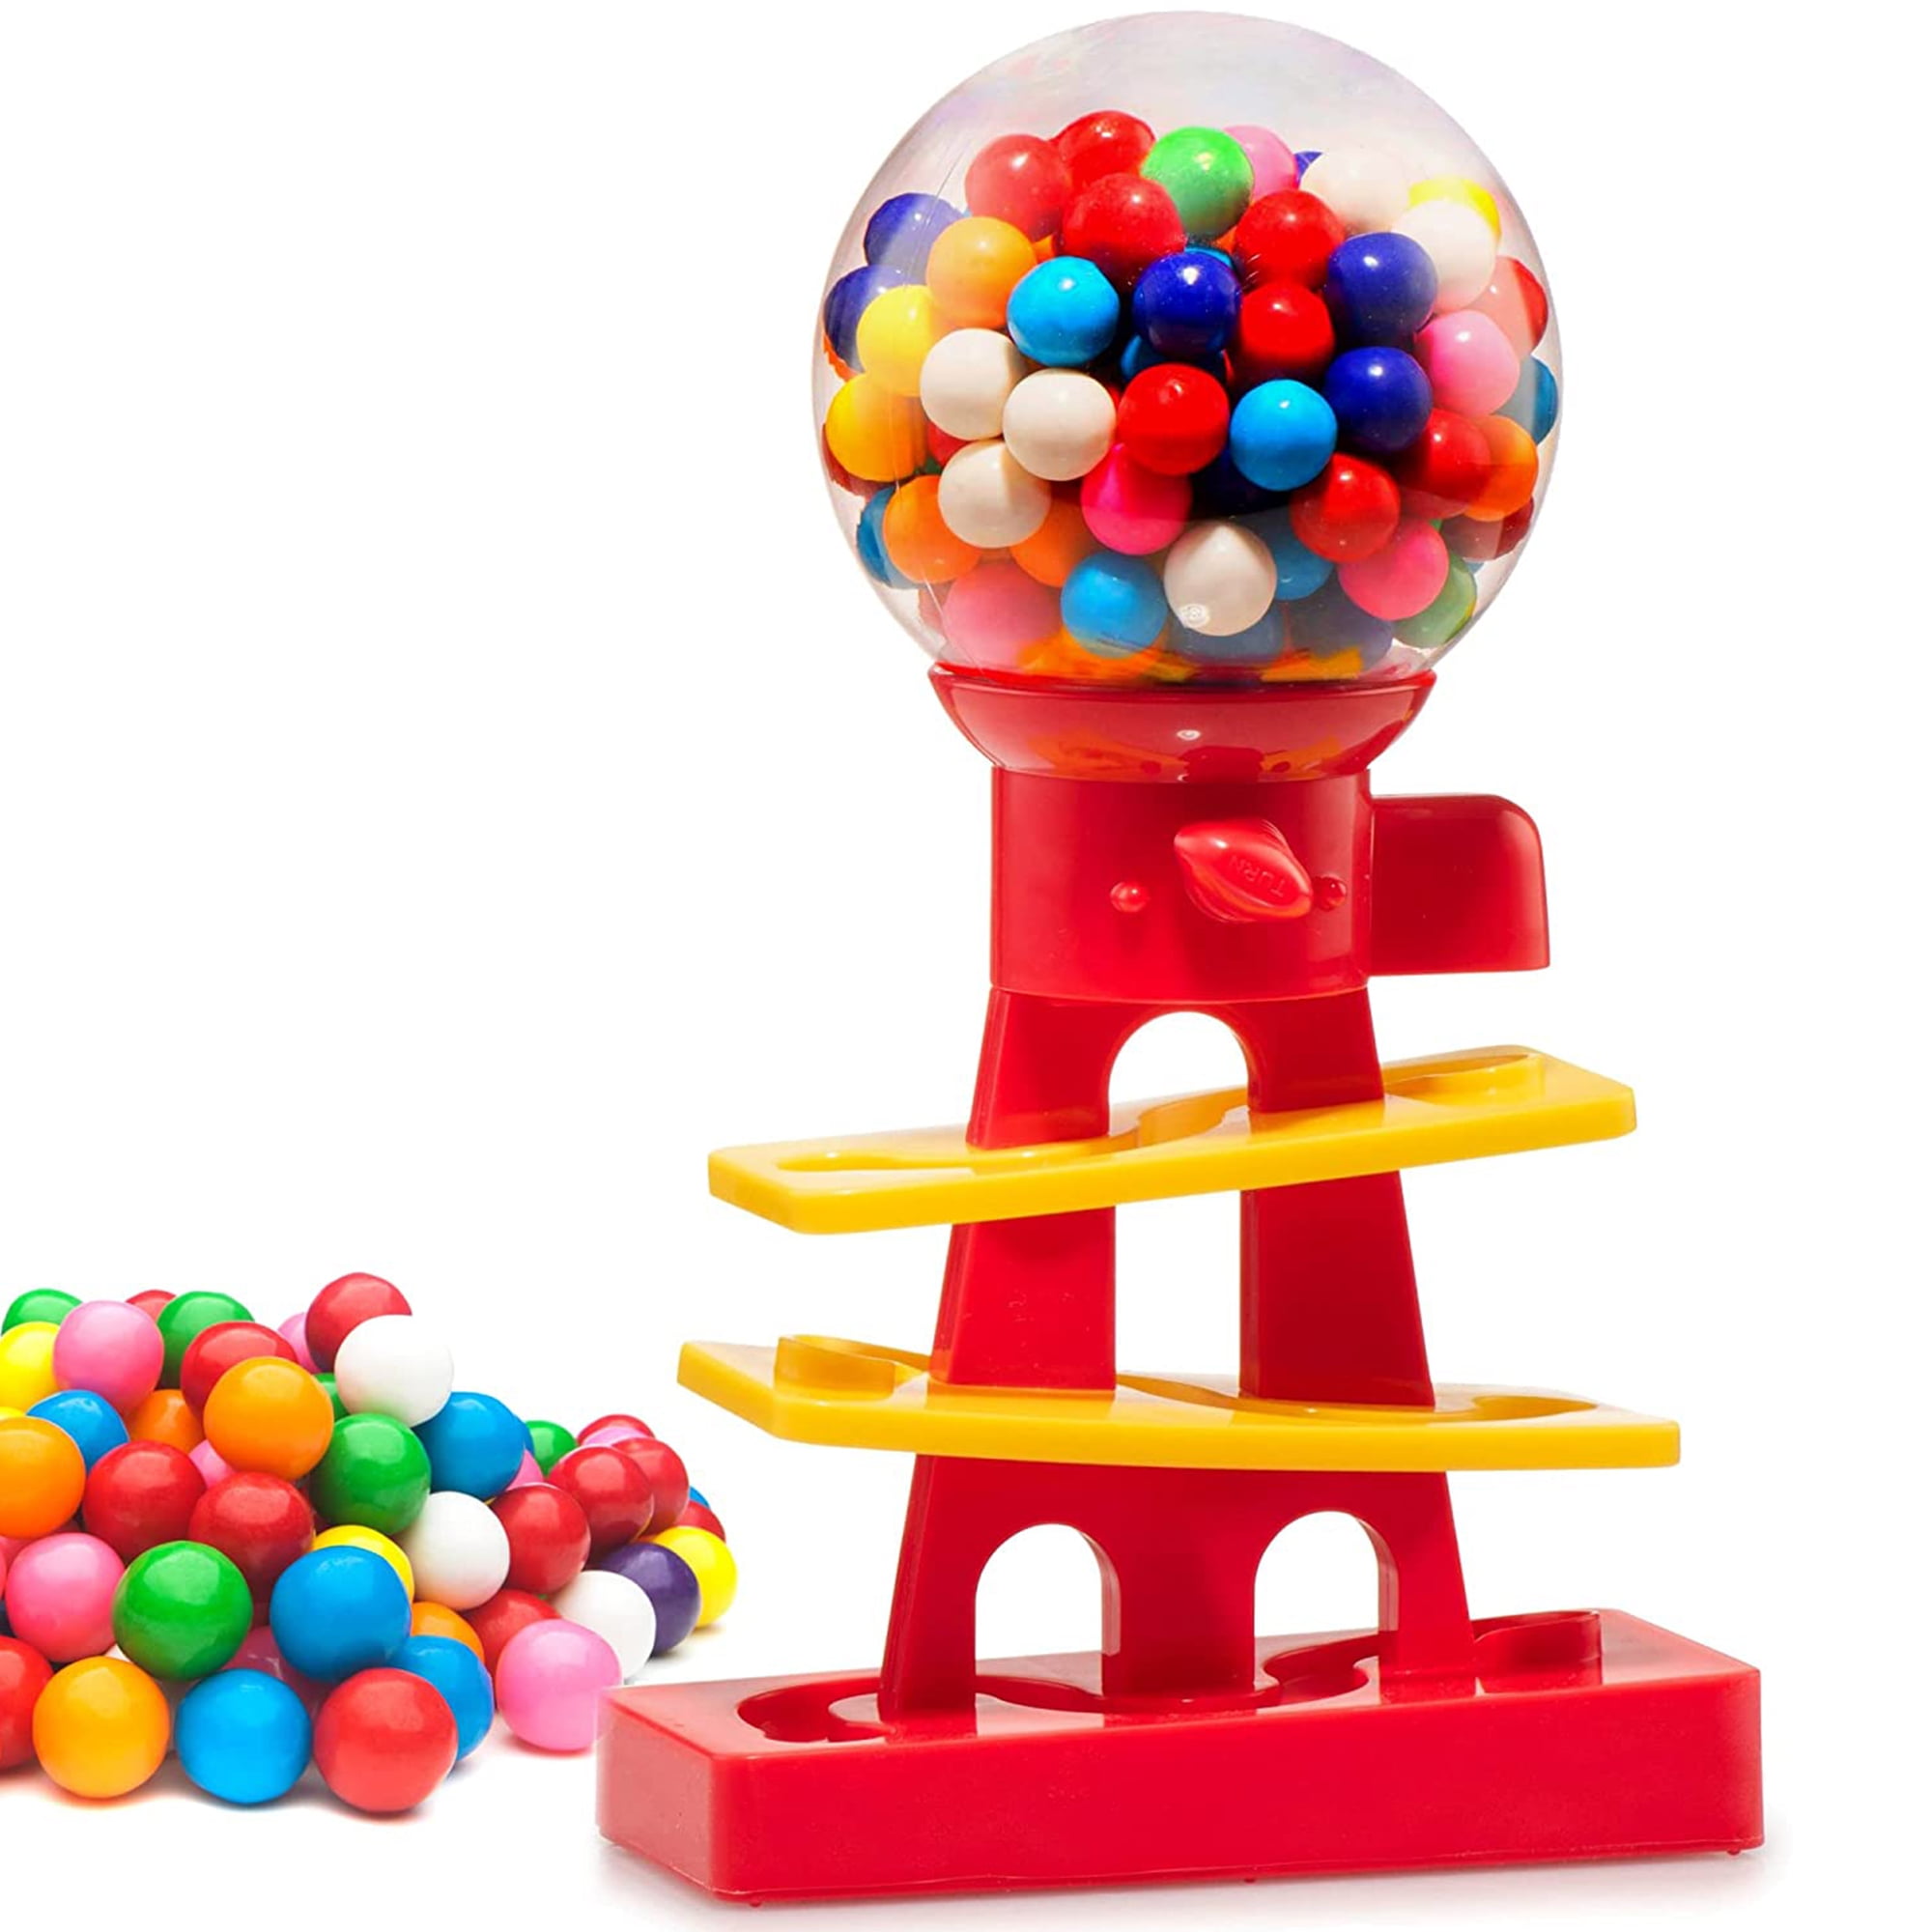 Spiral Gumball Machine - Assorted Colors: Rebecca's Toys & Prizes